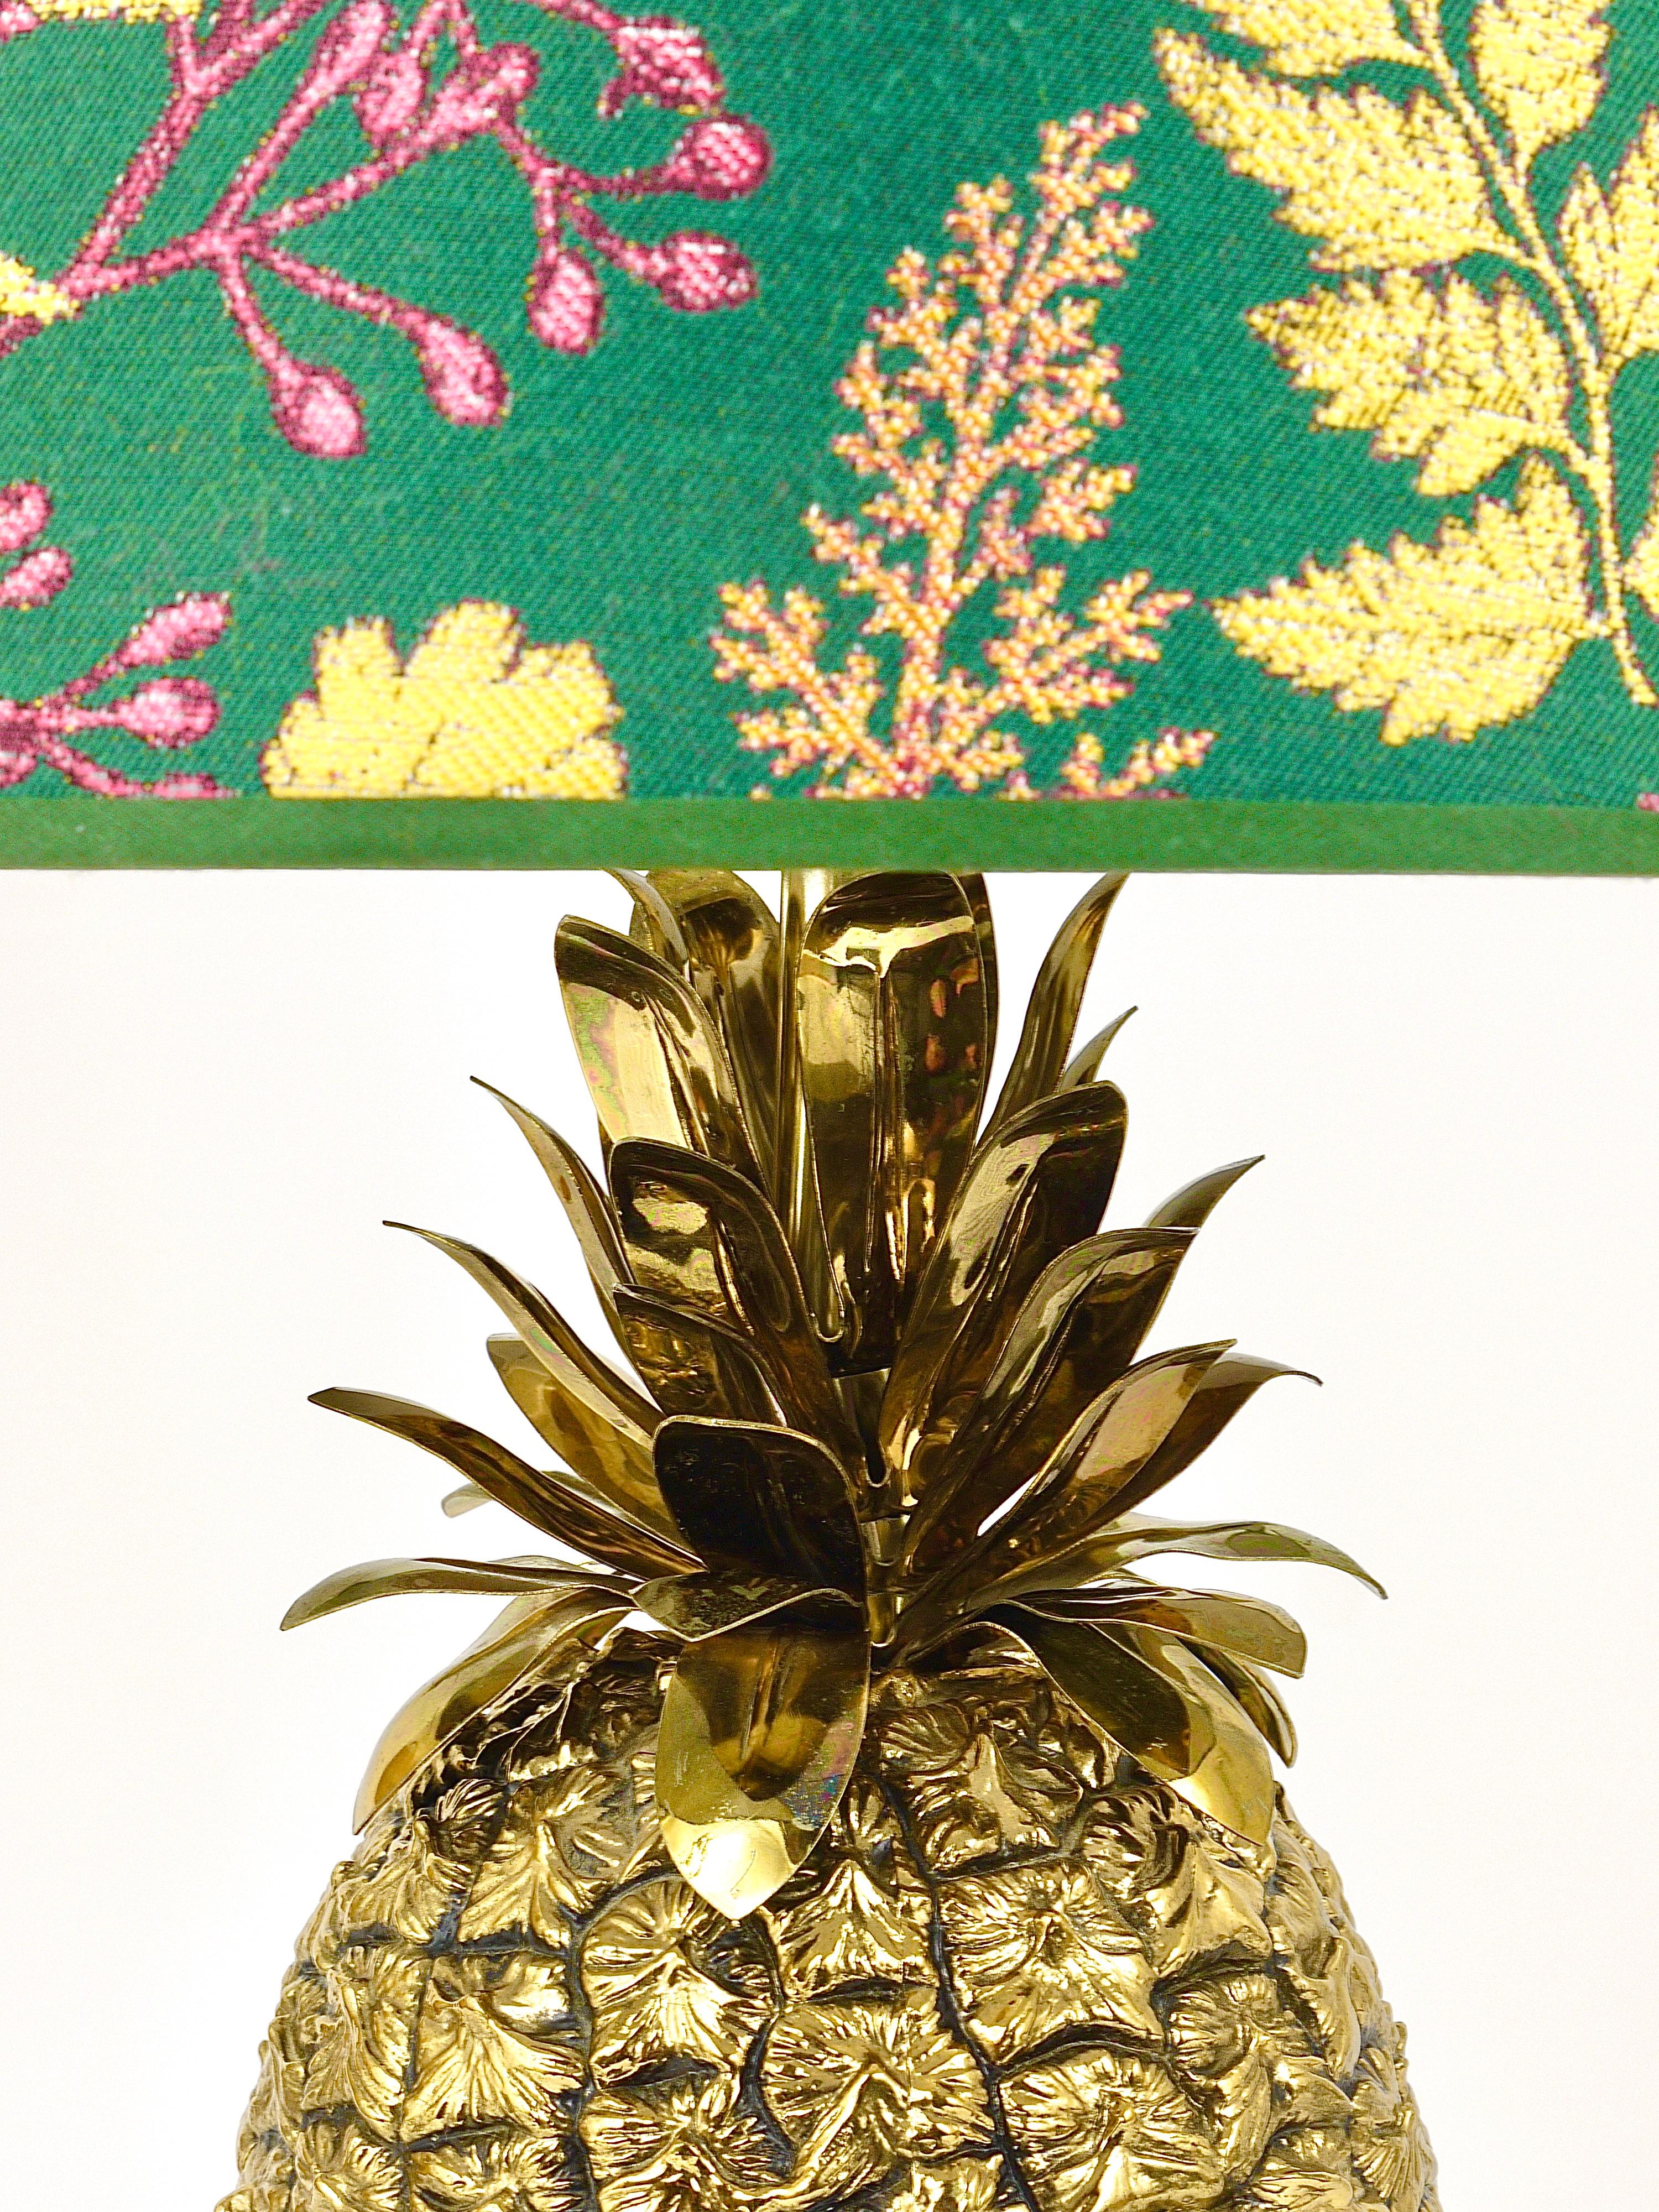 Mauro Manetti Hollywood Regency Pineapple Brass Table Lamp, Italy, 1970s For Sale 2